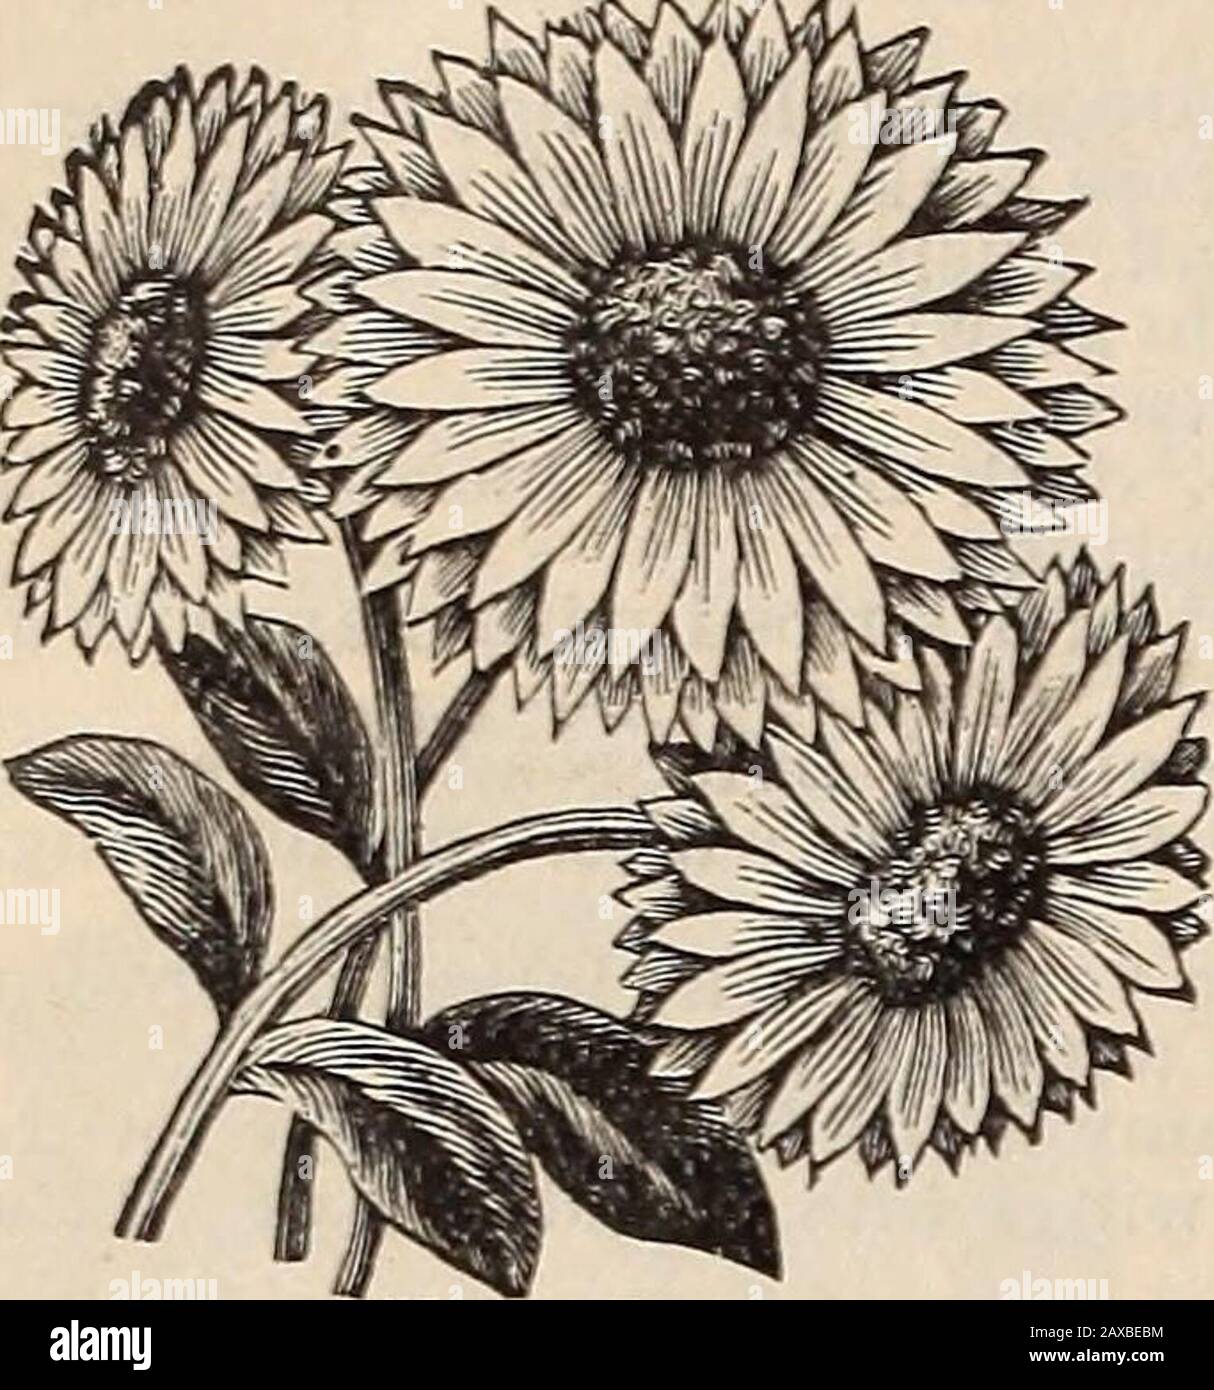 Garden, field and flower seeds . wers.IncanaHybrida,Pkt., 5cts.WAITZIA.Flowers in clusters, andshould be picked early beforecentre becomes discolored.Grandiflora. Golden yel-low, . Pkt., 10 cts. XER ANTHEMU S.This is the most sbowyclass of Everlastings, bearingfine double flowers.Mixed. Purple, rose and Xeranthemum. white, Pkt, 5 cts. ORNAMENTAL GRASSES.Agrostis Nebulosa. Fine andfeathery ; H. A. Pkt., 5 cts.Arundo Don ax. Silveryplumes, large size; H. P. Pkt.,5 cts. Avena Sterilis (Animated Oats). Very curious; H. A. Pkt., 5 cts.Briza Gracilis,) Quakingv Grasses. H.Briza Maxima,) A. Pkt., 5c Stock Photo